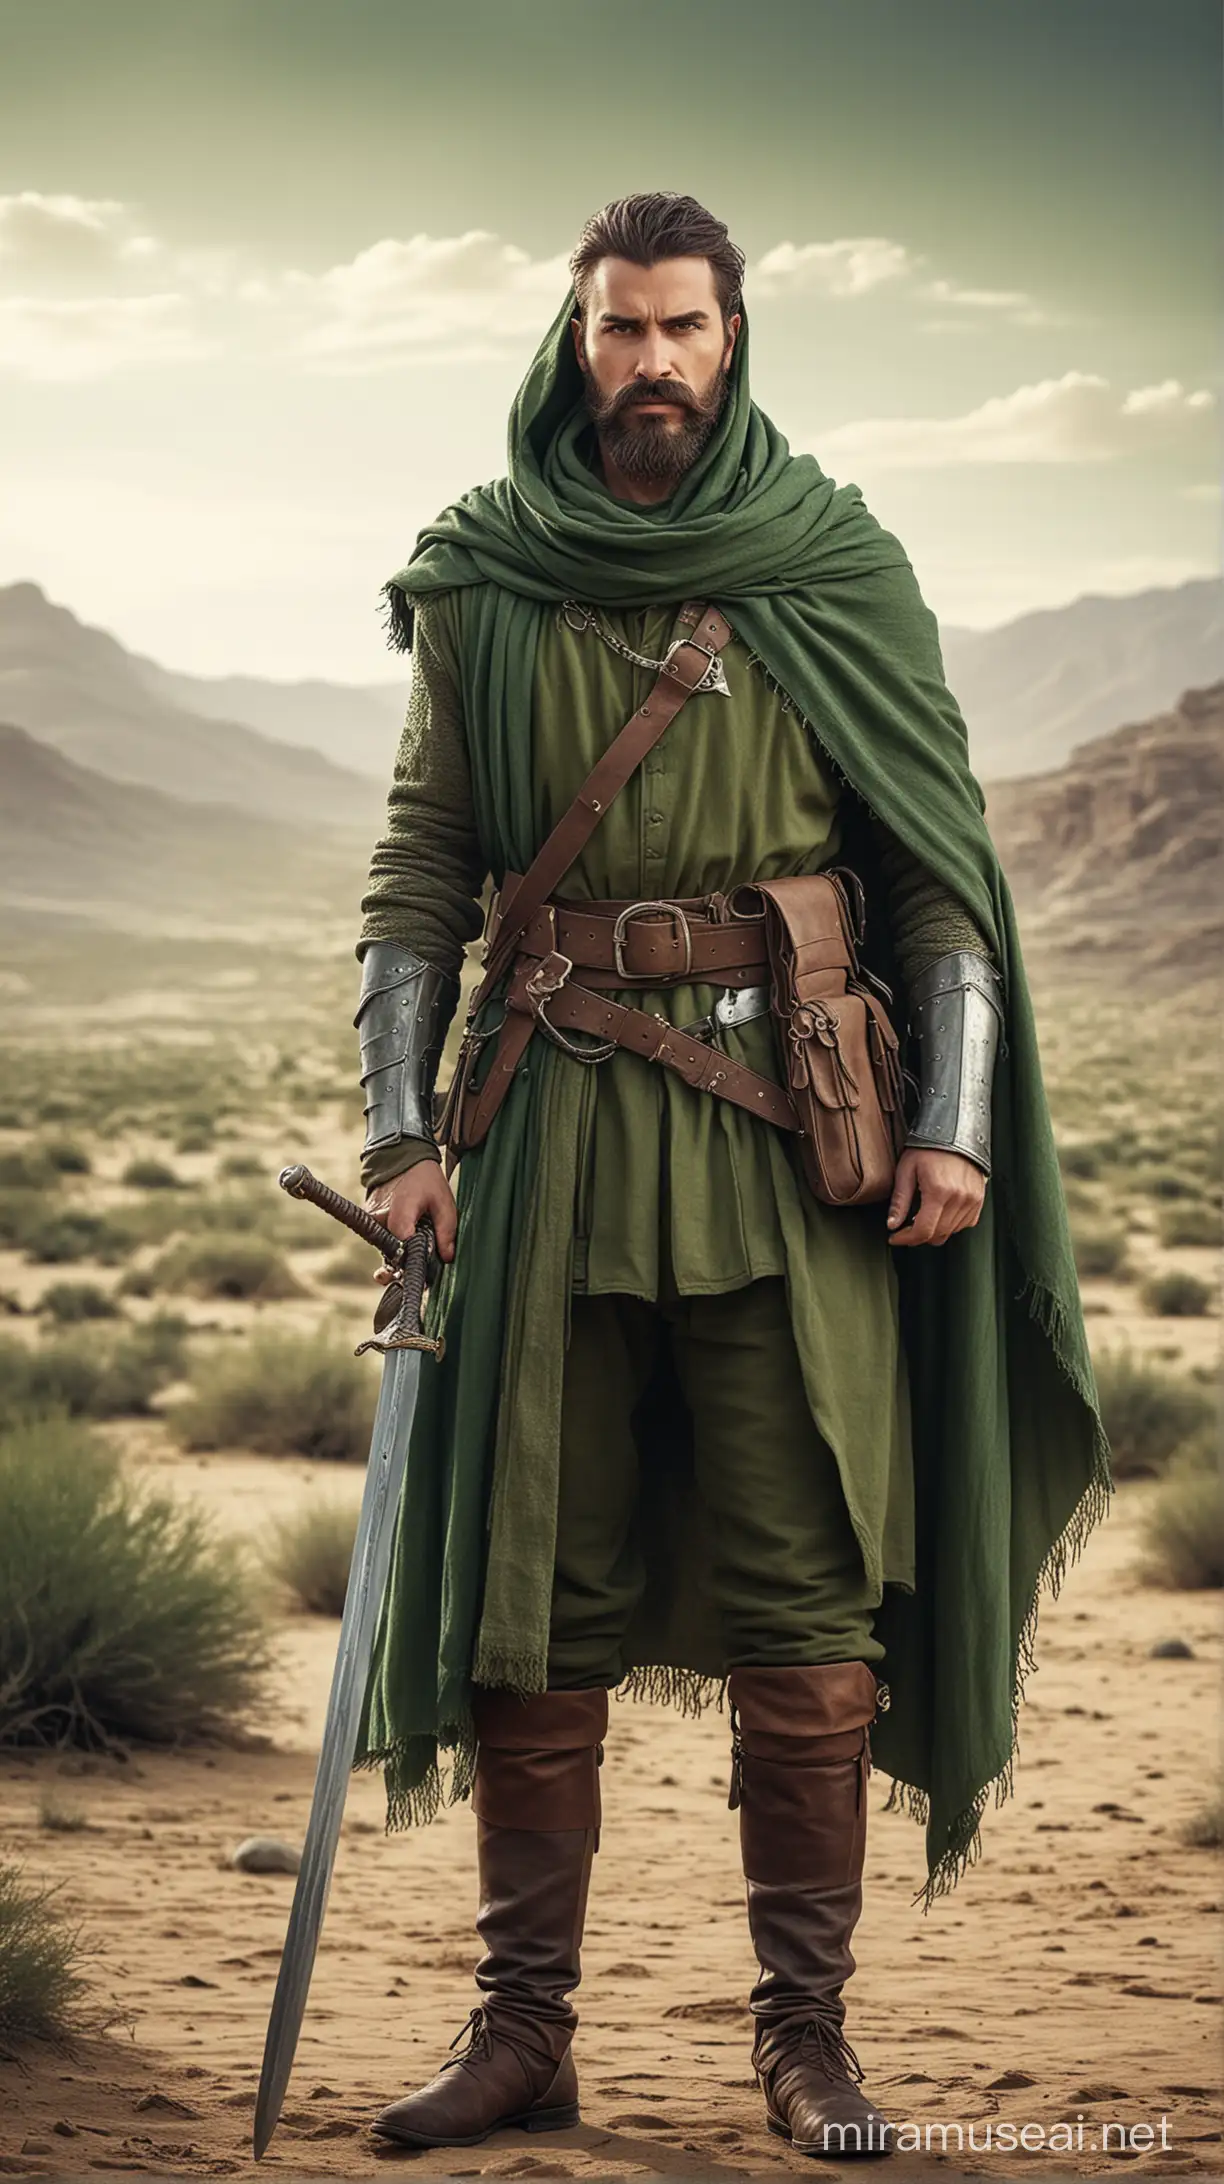 A man wearing green medieval battle attire,  holding a sword, a medium beard and mustache, and covering his head with a green scarf, standing in a desert land, atmospheric mood, realistic style, Version 6